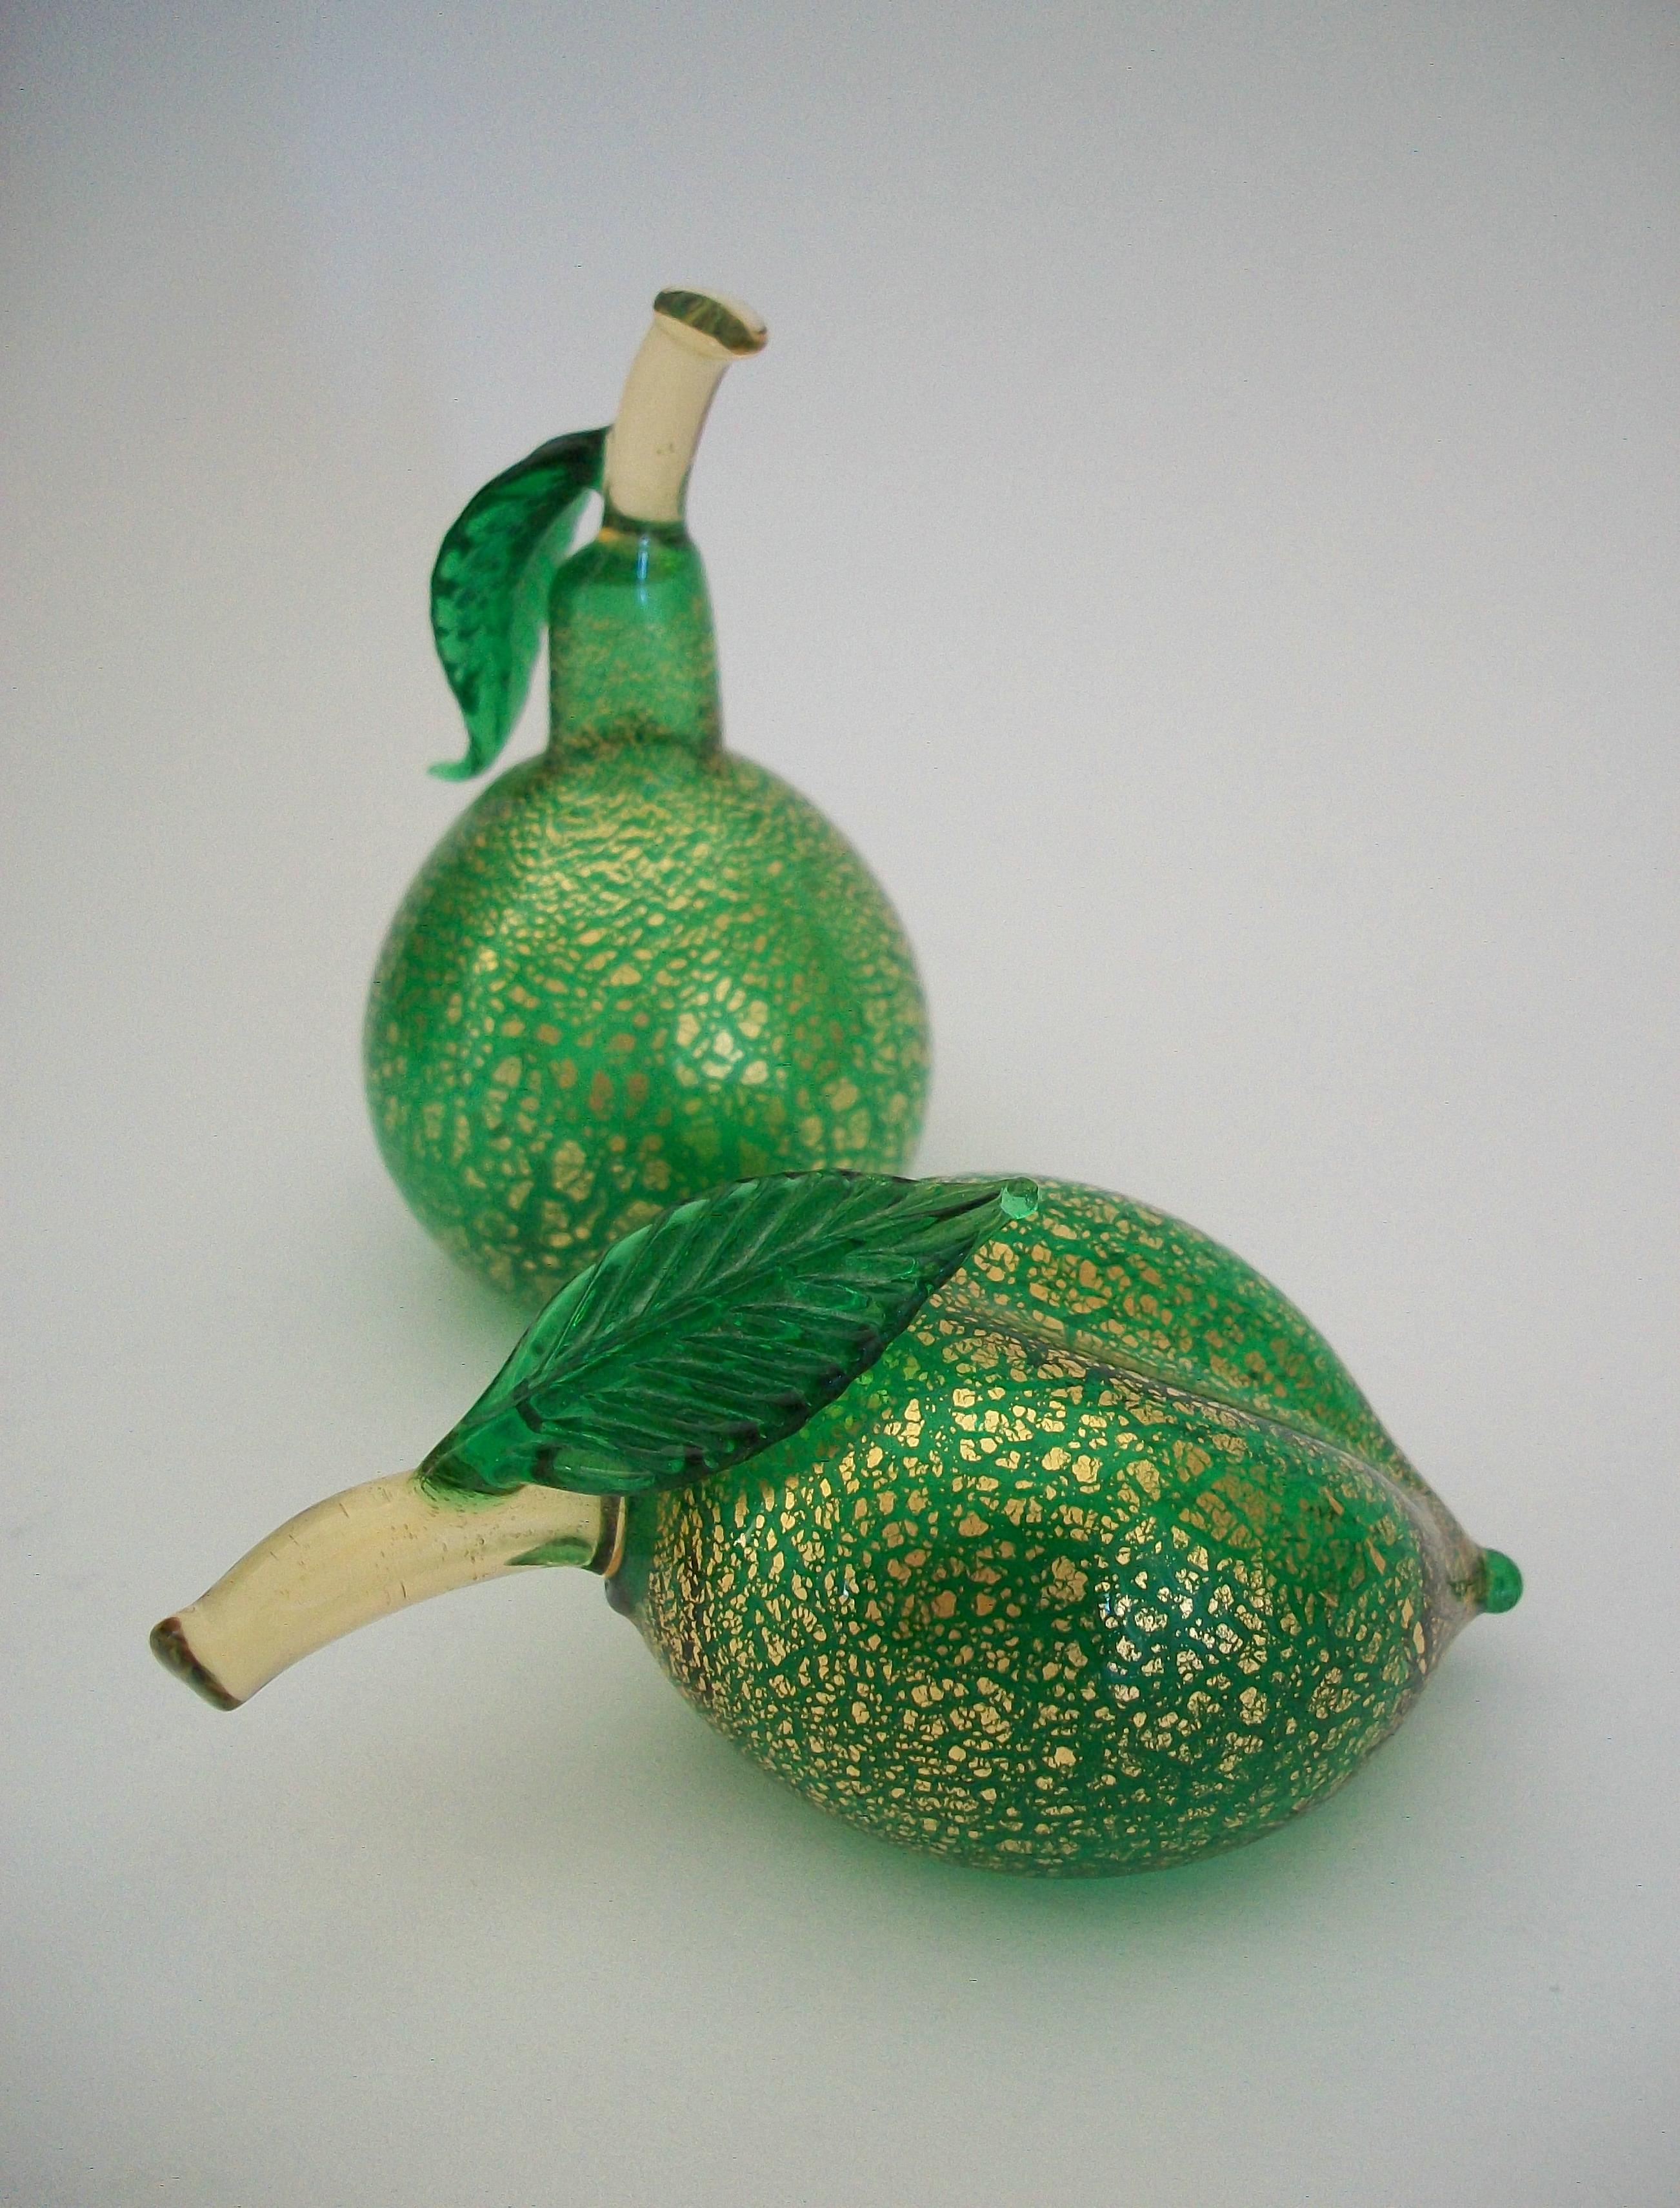 ALFREDO BARBINI (Attributed) - Rare Mid Century Murano glass ' lemon and pear ' - hand made / mouth blown with green glass bodies and solid amber glass stems and pressed green glass leaves - striking gold flakes throughout the bodies of each piece -